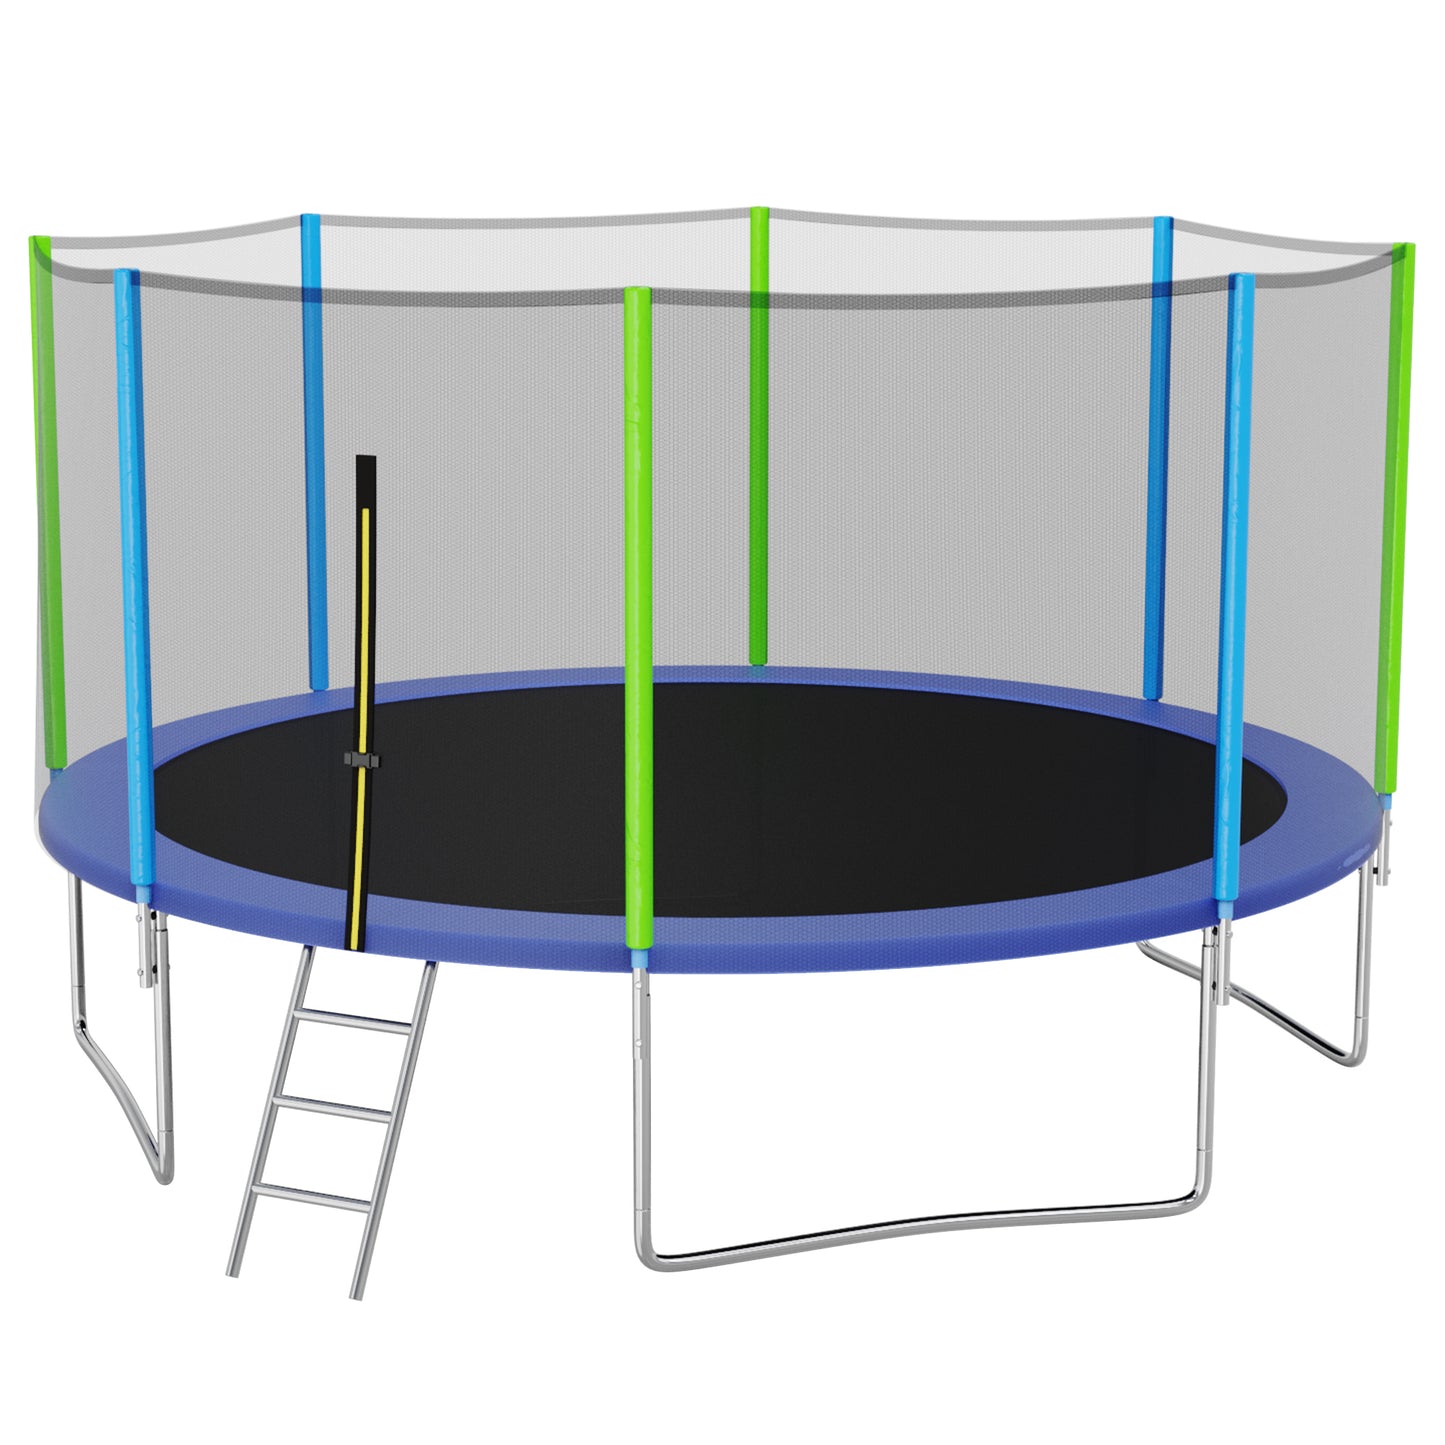 12FT Trampoline for Kids with Safety Enclosure Net, Ladder d 8 Wind Stakes, Spring Cover Padding